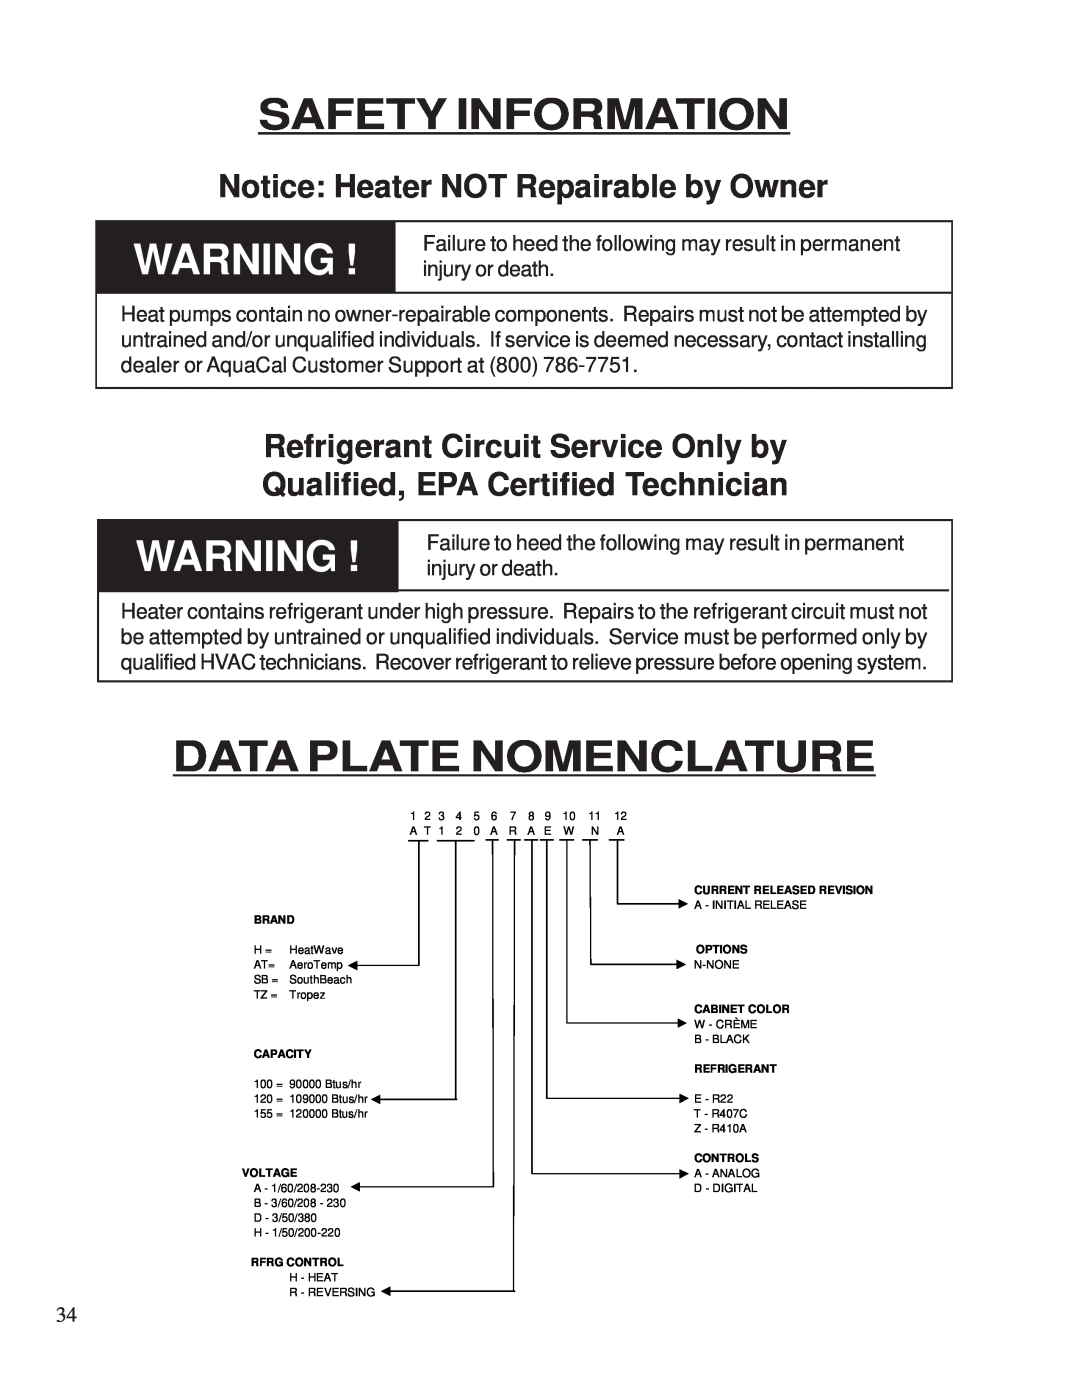 Aquacal 155, 120 owner manual Data Plate Nomenclature, Safety Information, Notice: Heater NOT Repairable by Owner 